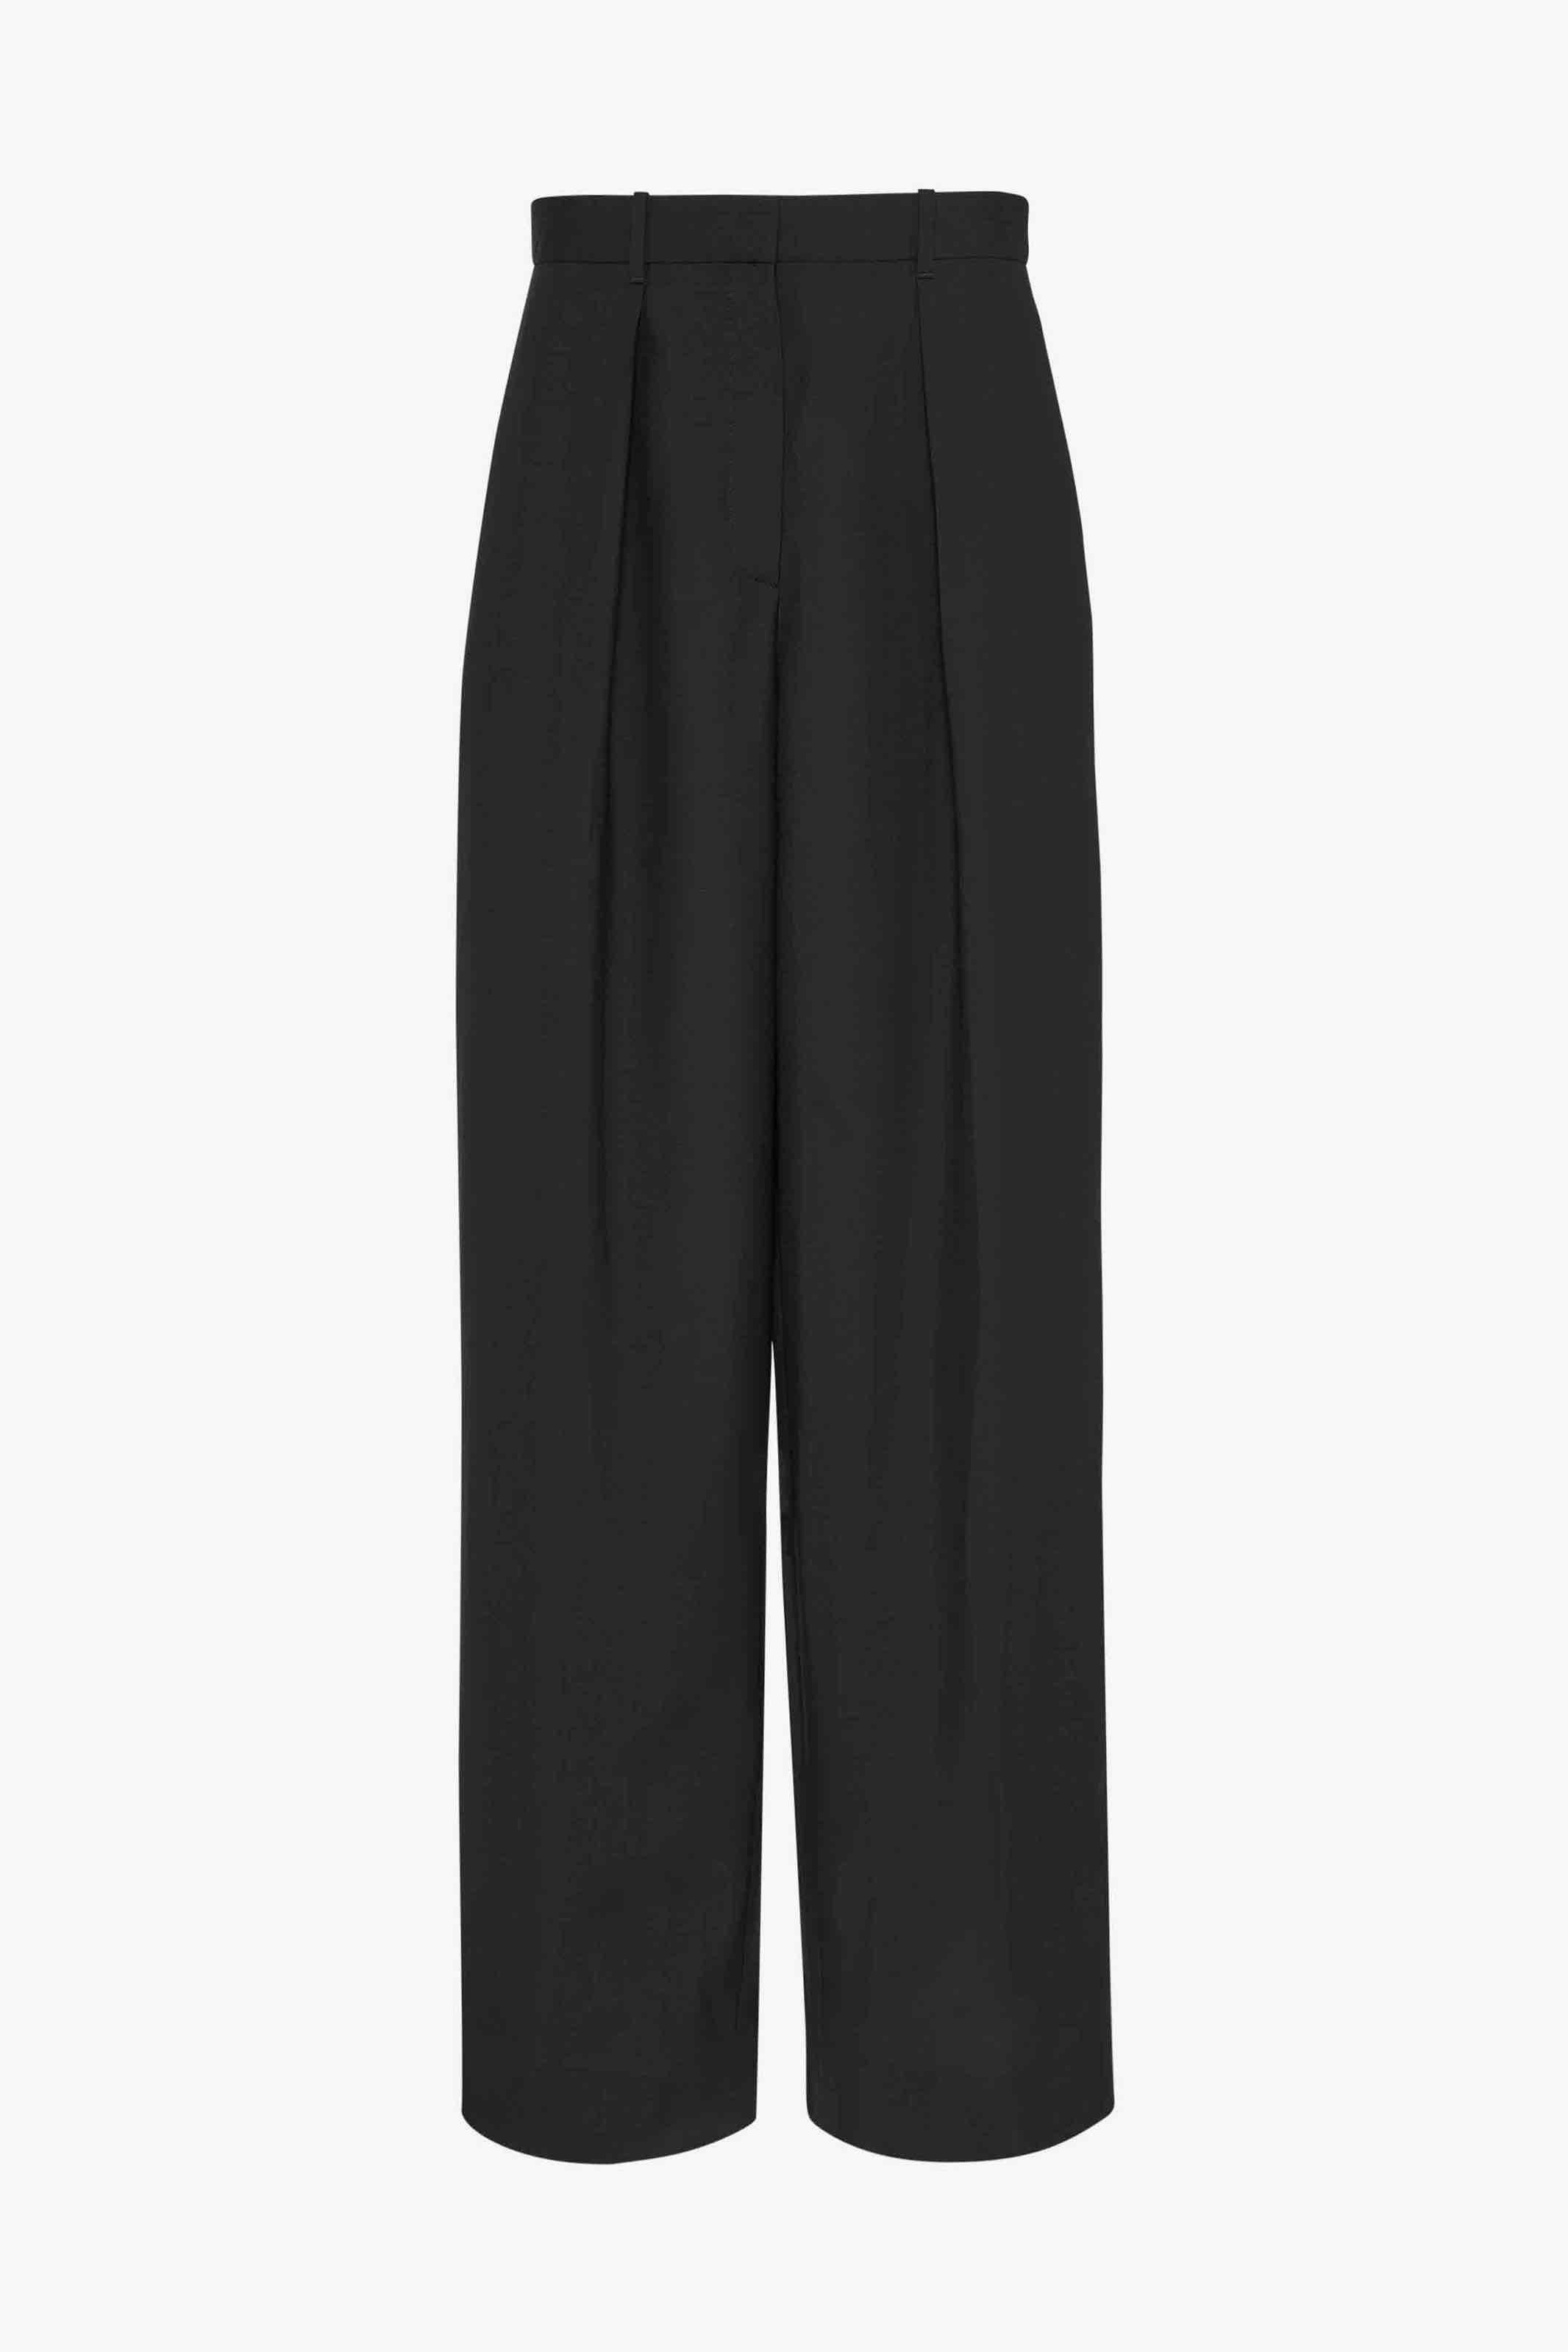 Marce Pant, The Row, Rs 103631 approx